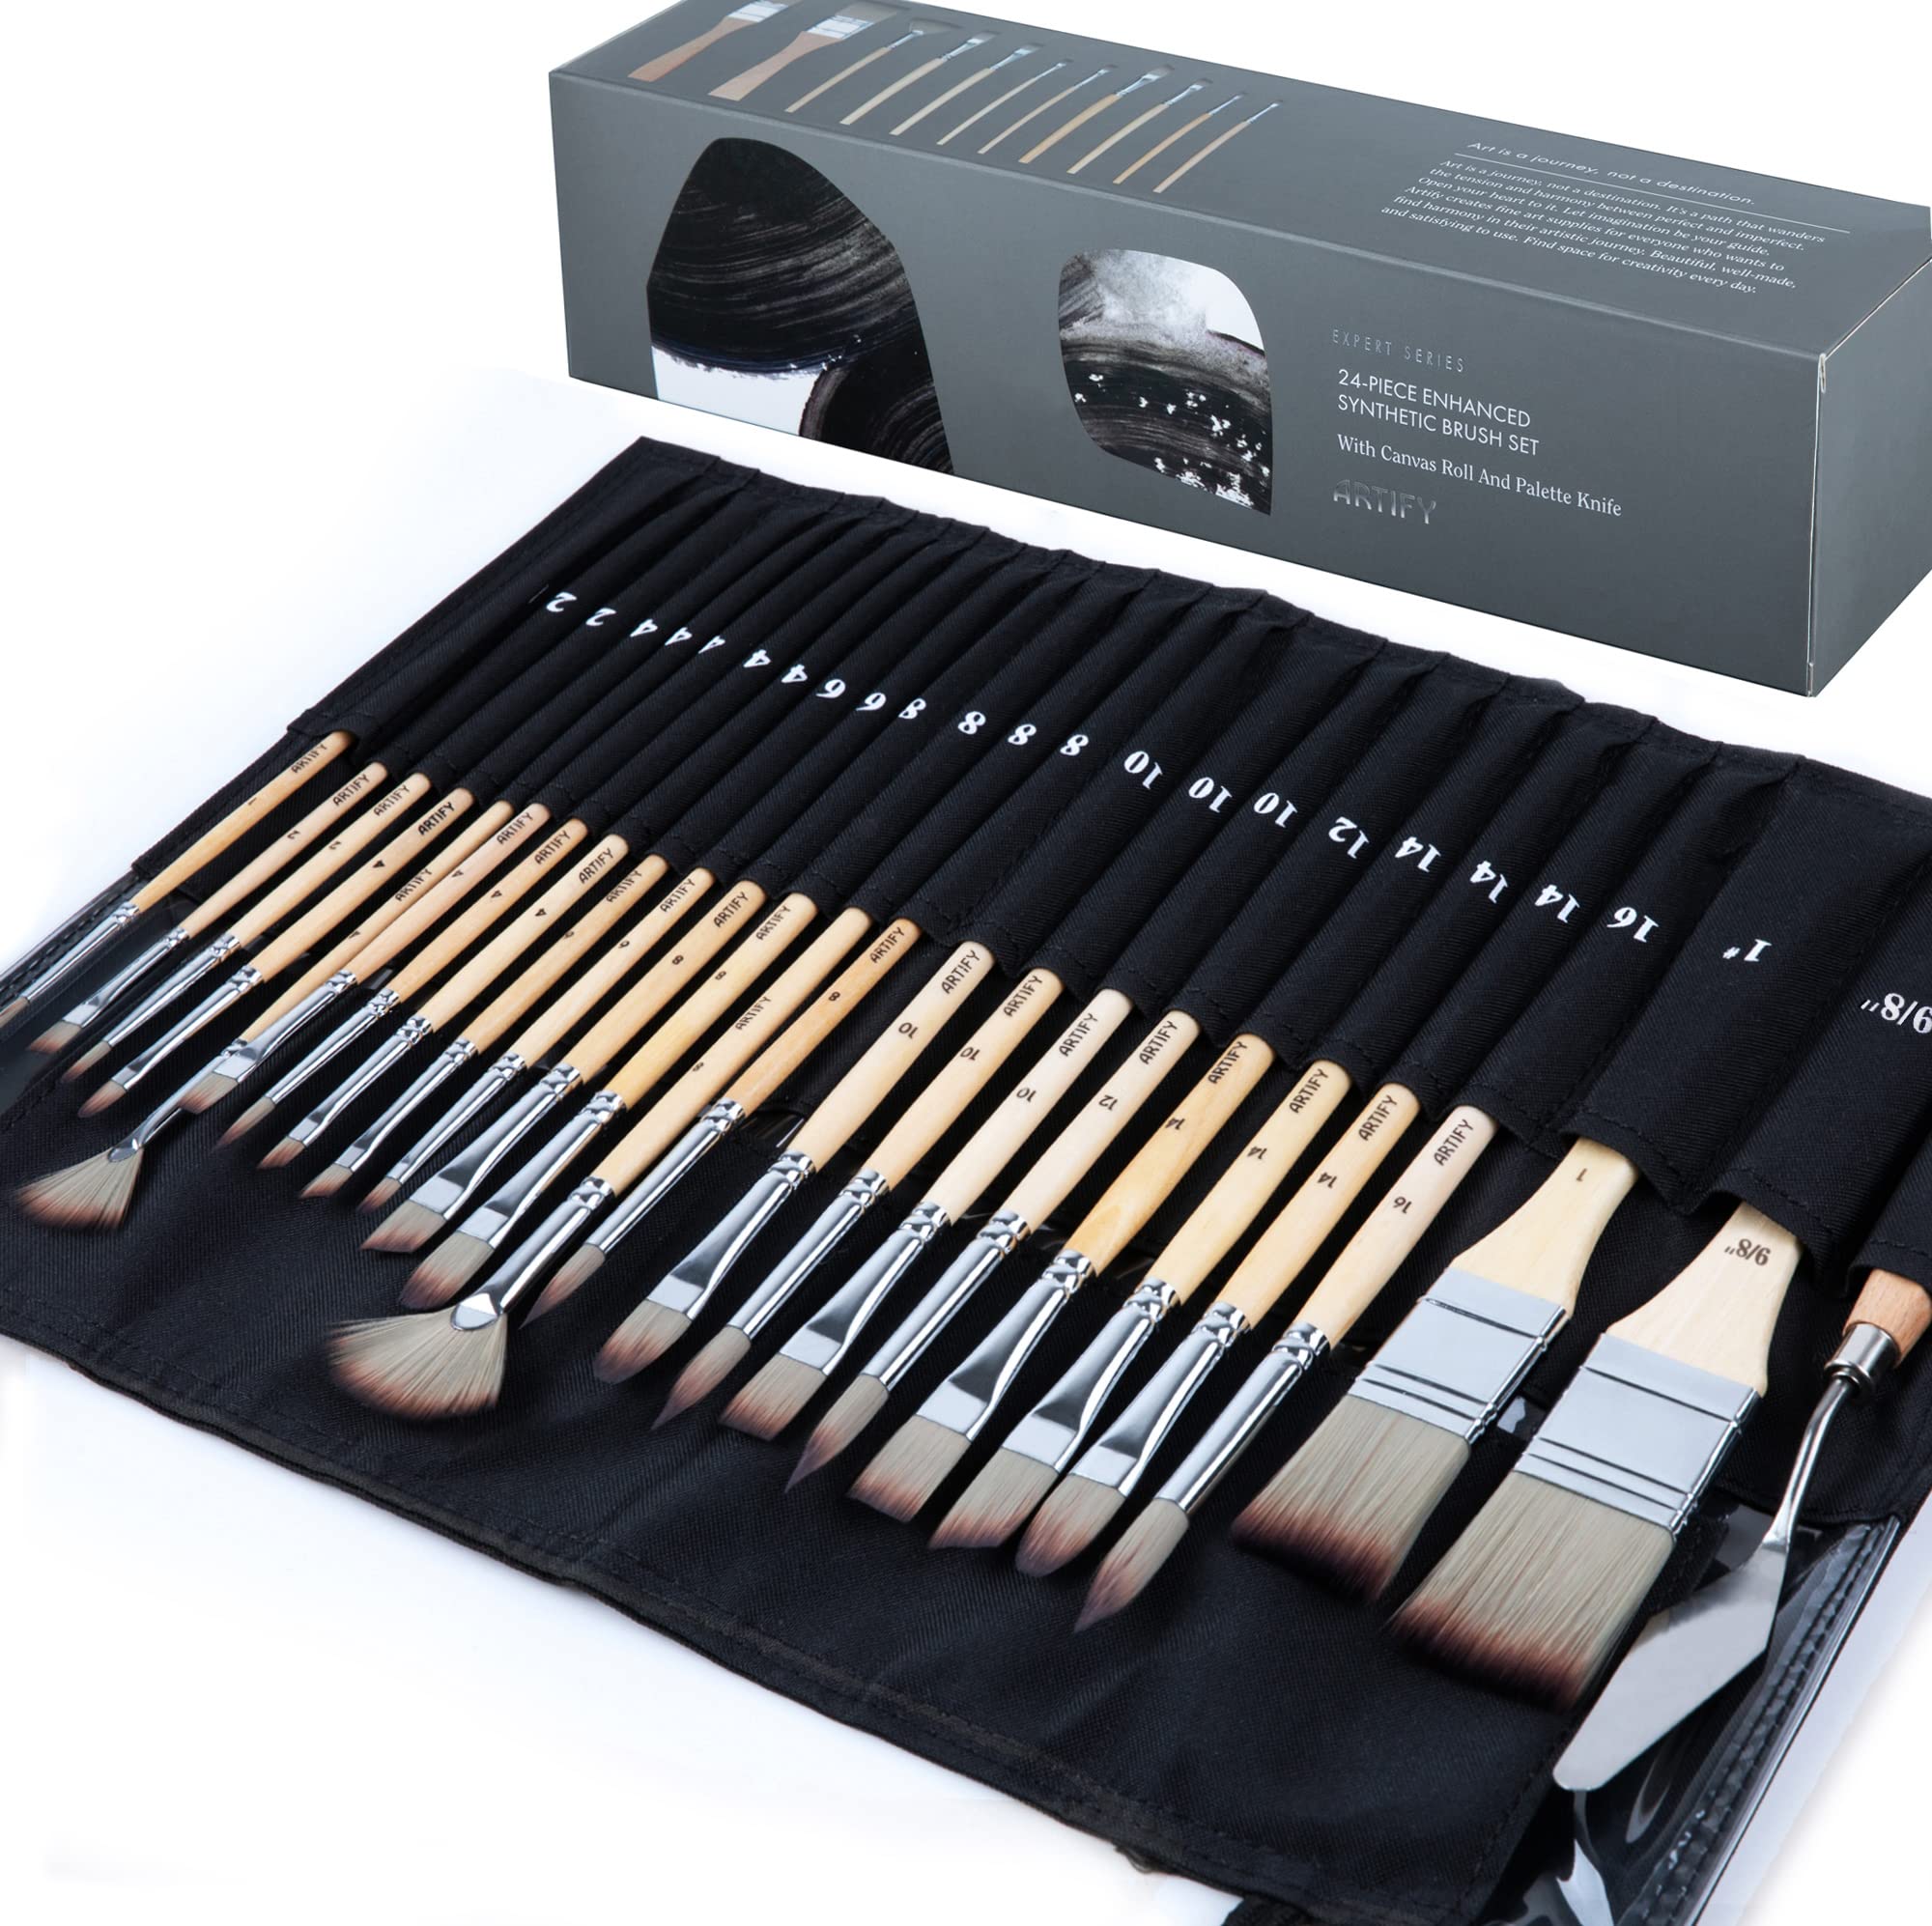 ARTIFY 24 Pieces Paint Brush Set Expert Series Enhanced Synthetic Brush Set  with Cloth Roll and Palette Knife for Acrylic Oil Watercolor and Gouache  (Birch)